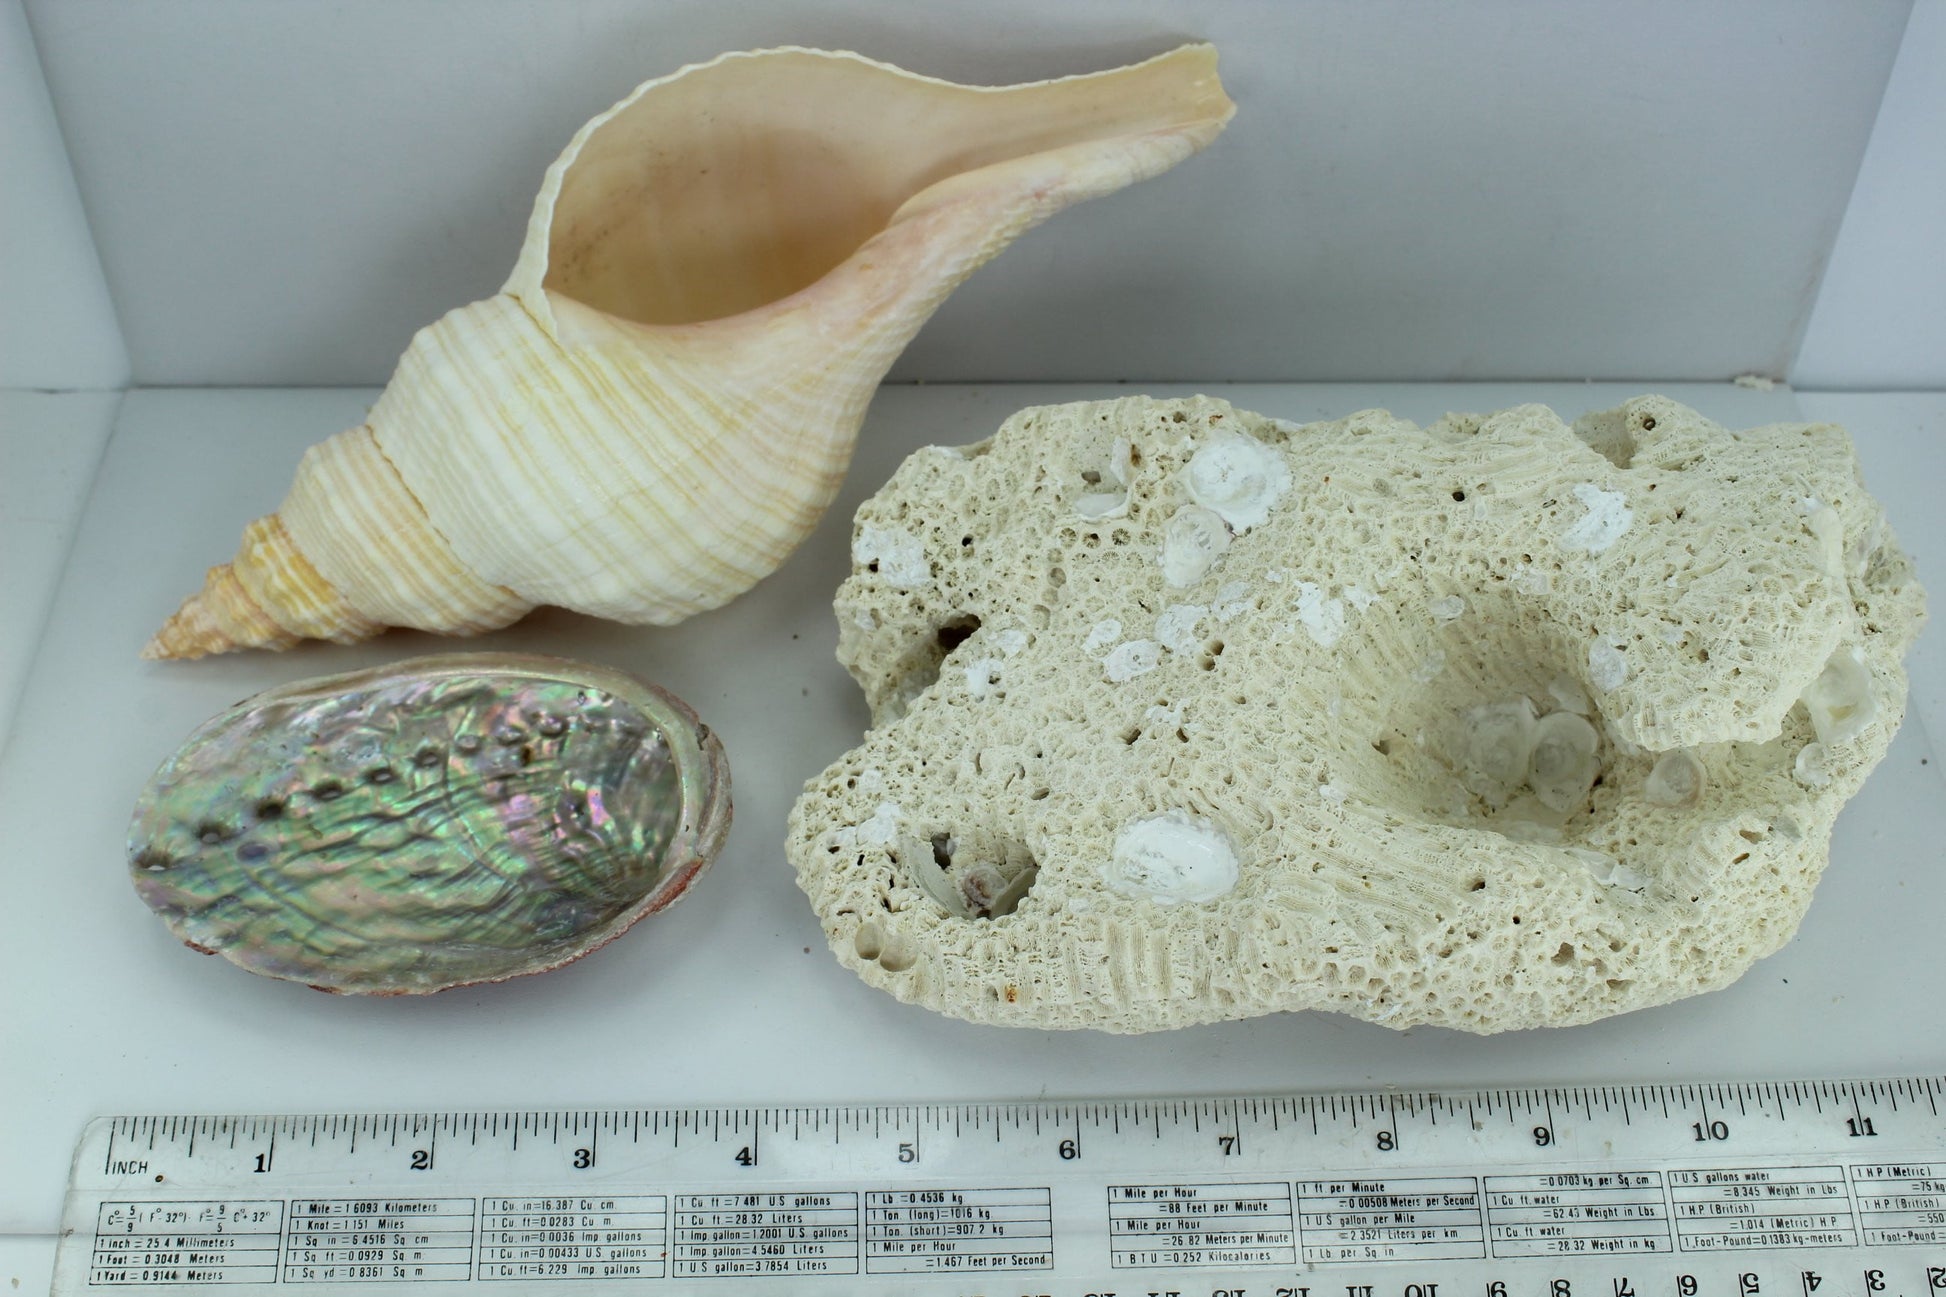 Florida Natural Shells Coral Horse Conch Red Abalone Vintage Estate Collectiom Shell Art C